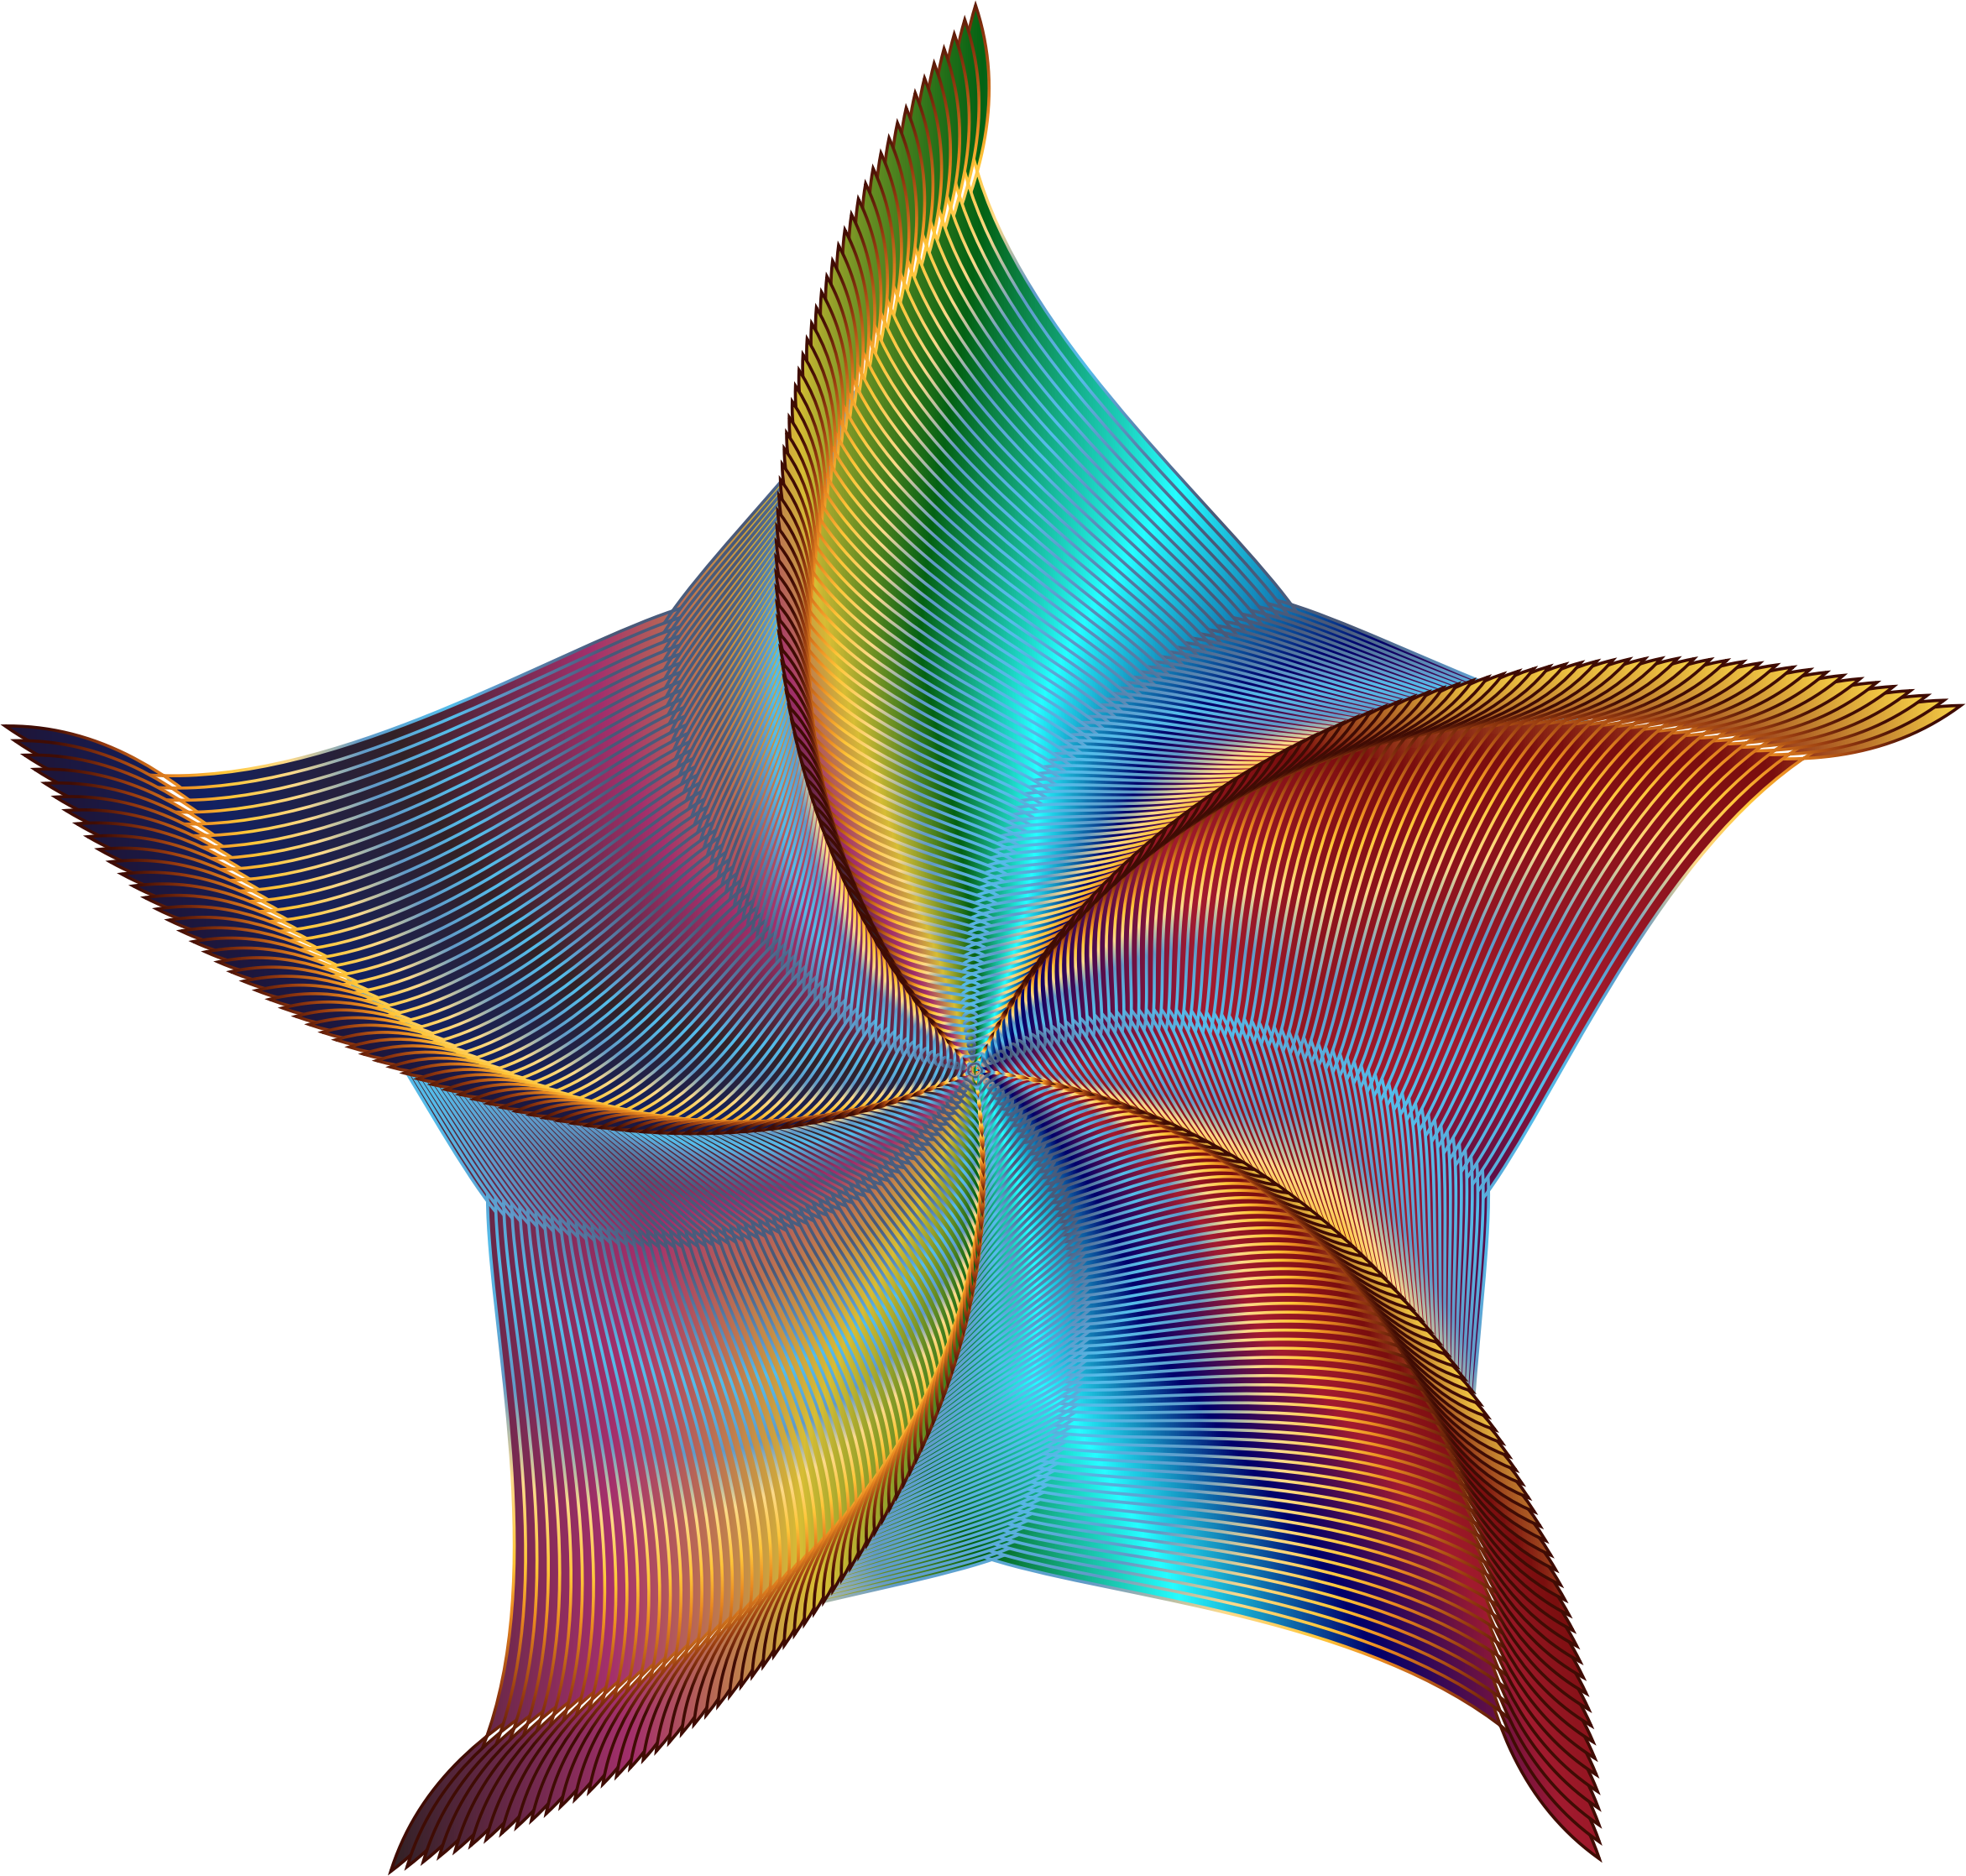 A Colorful Star Shaped Object